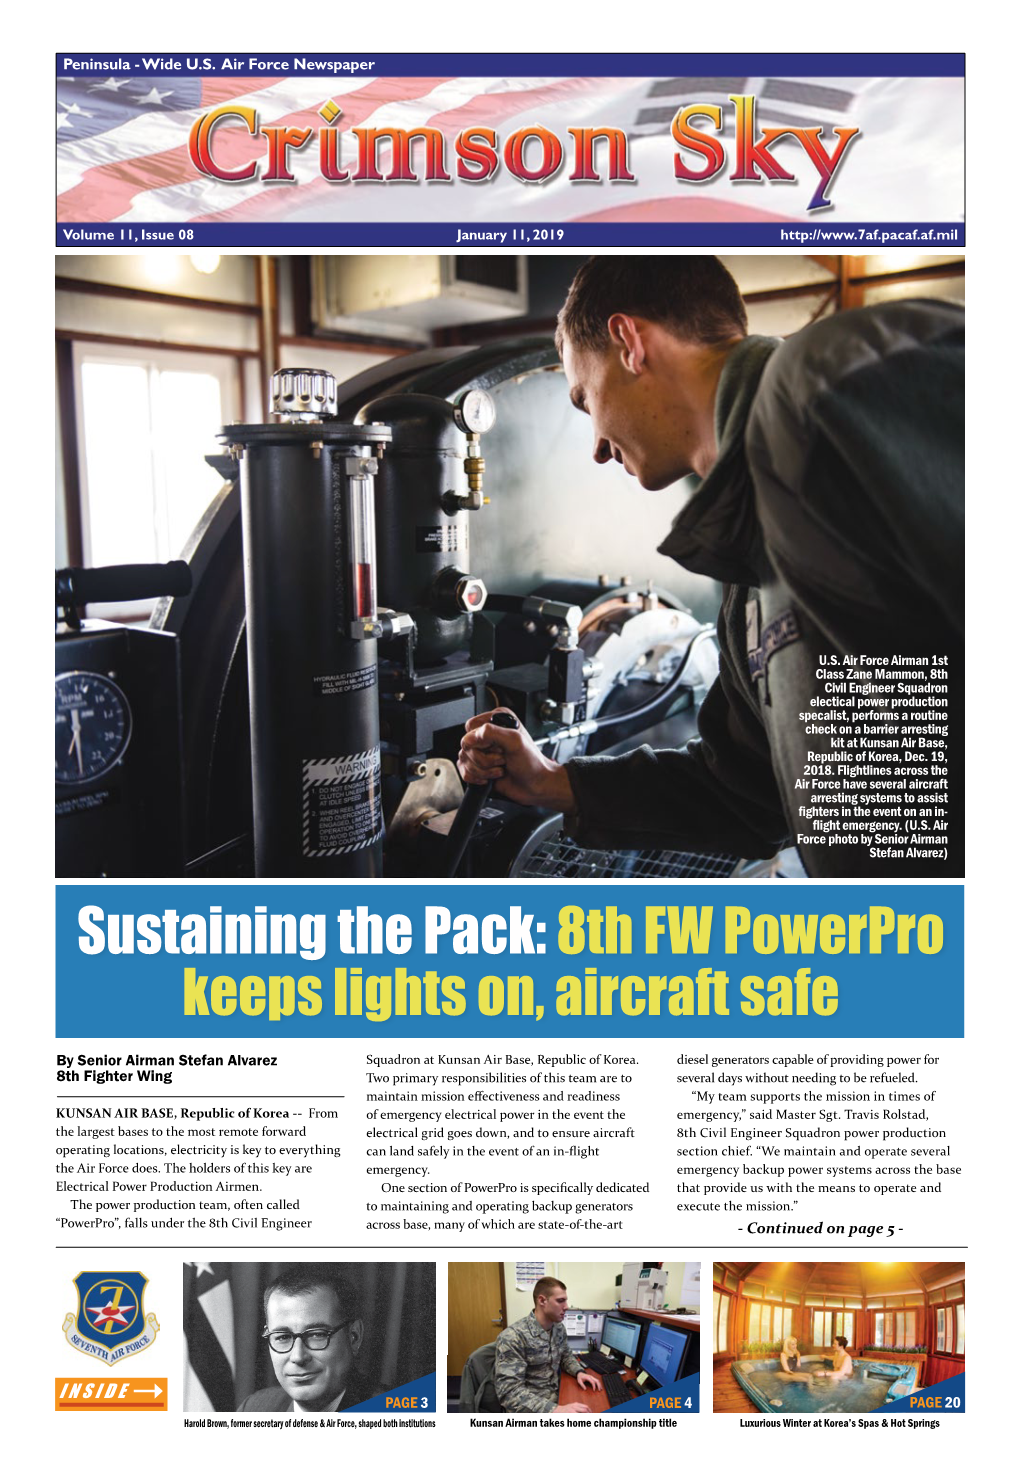 Sustaining the Pack: 8Th FW Powerpro Keeps Lights On, Aircraft Safe